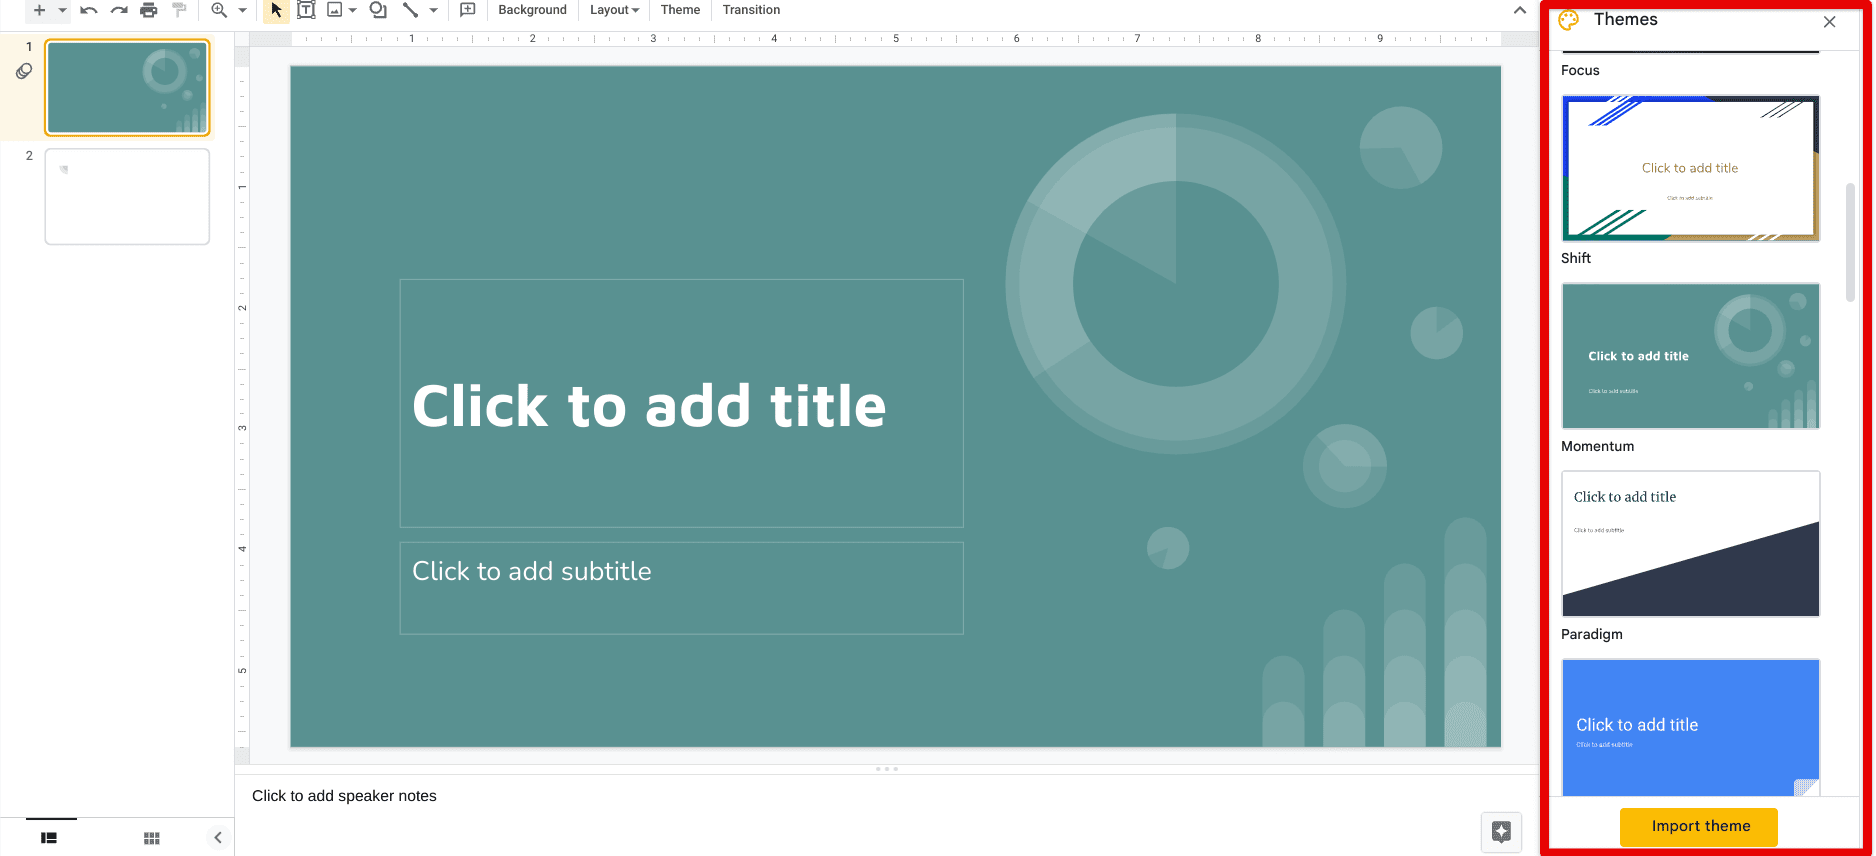 Using the "Themes" feature in Slides